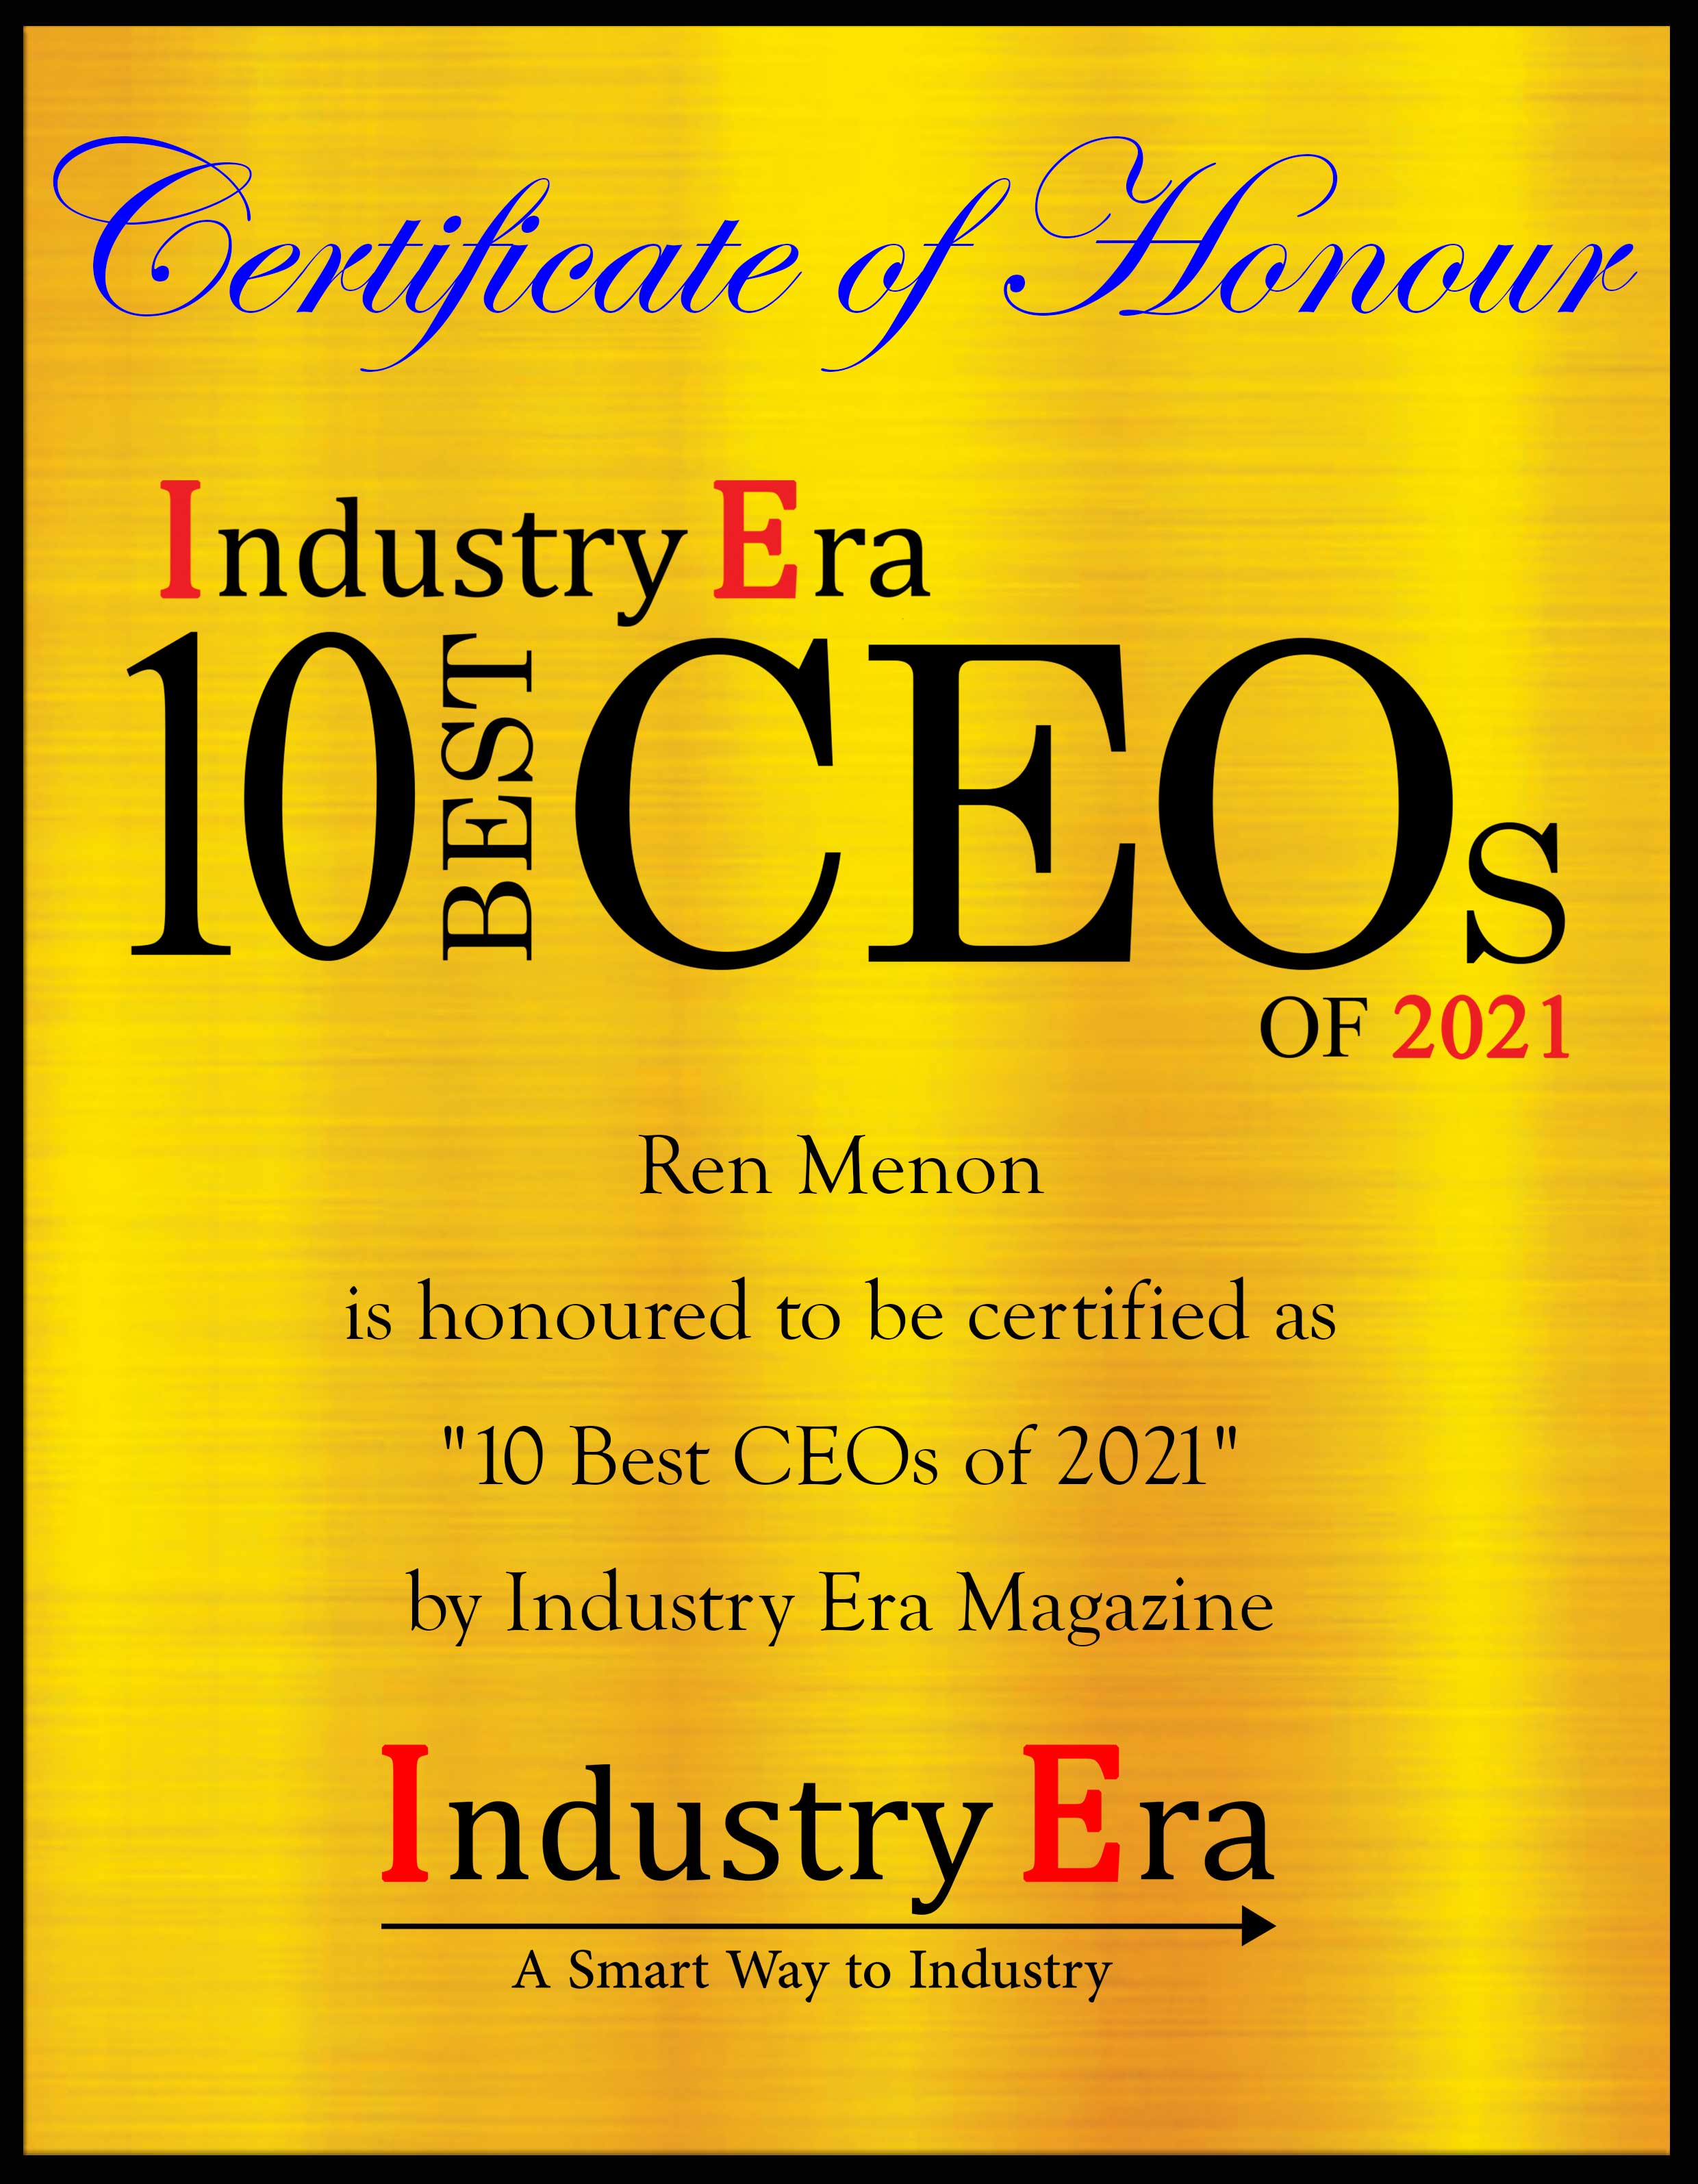 Ren Menon, Chief Executive Officer & co-founder of OrthoFX Certificate